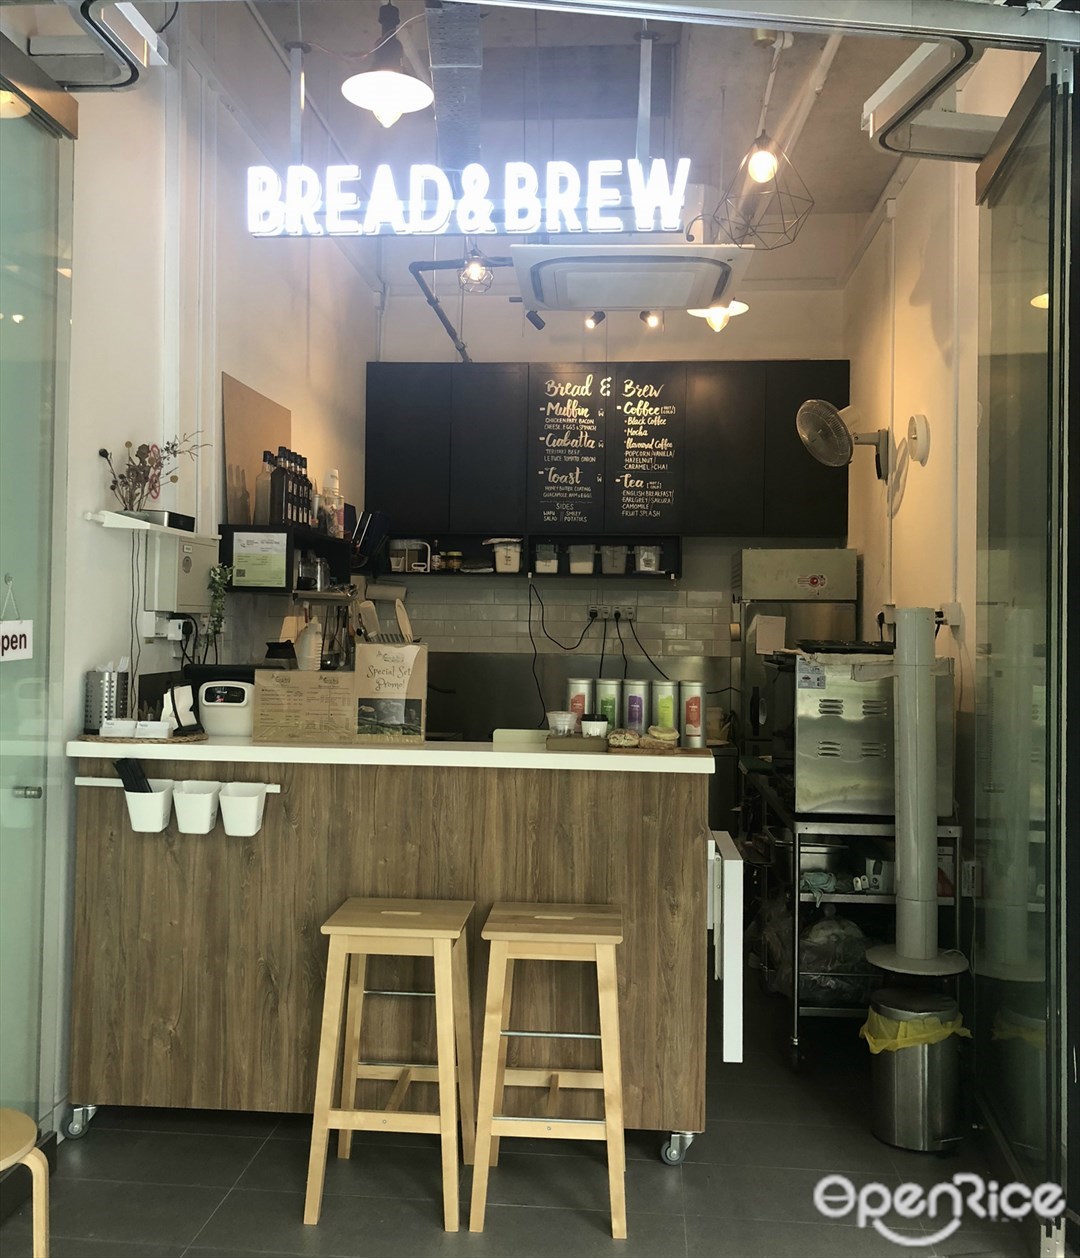 Bread Brew Burgers And Sandwiches Cafe In Tai Seng Singapore Openrice Singapore